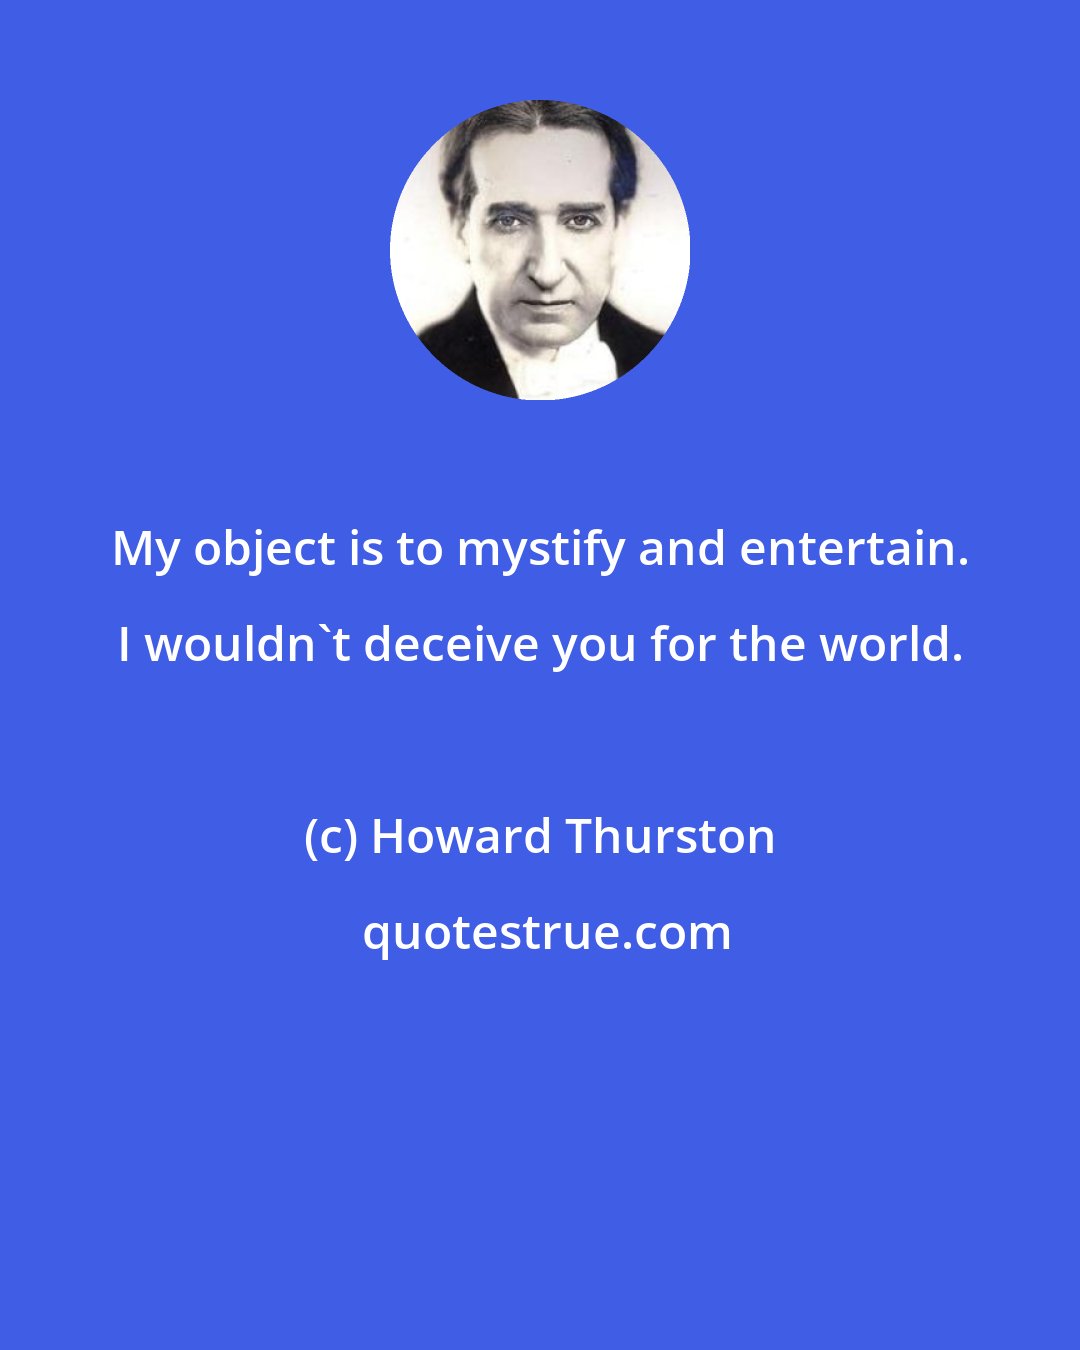 Howard Thurston: My object is to mystify and entertain. I wouldn't deceive you for the world.